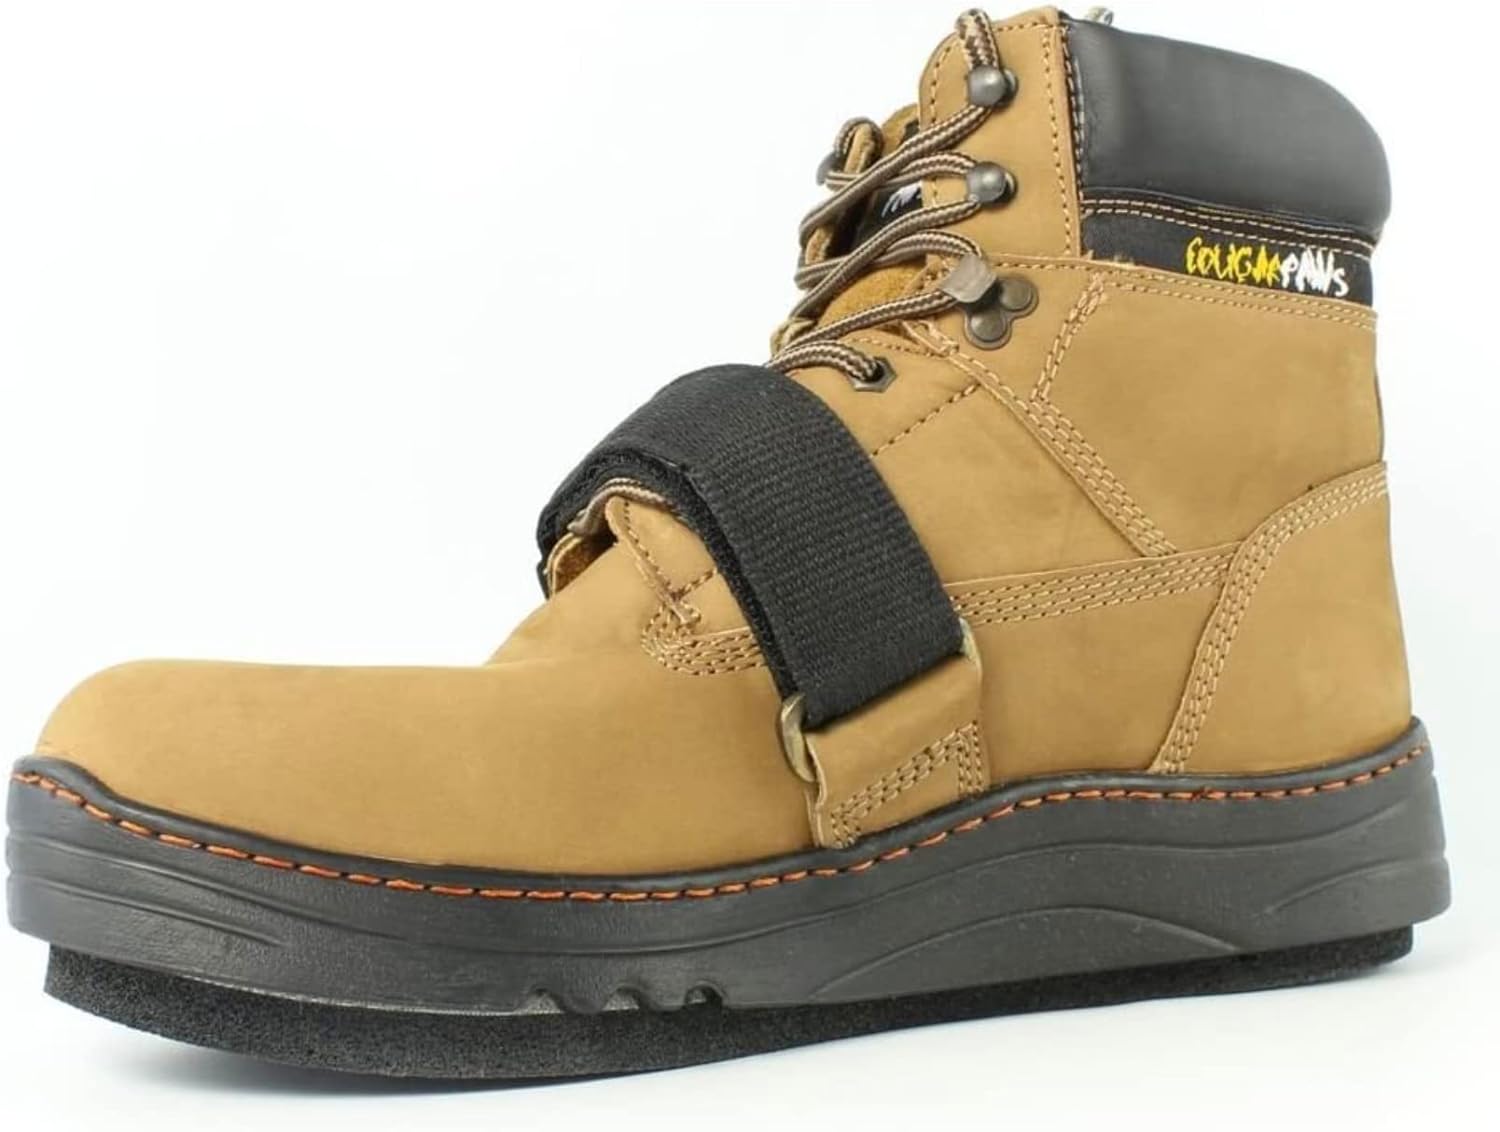 Cougar Paws Peak Performer Roofing Boots